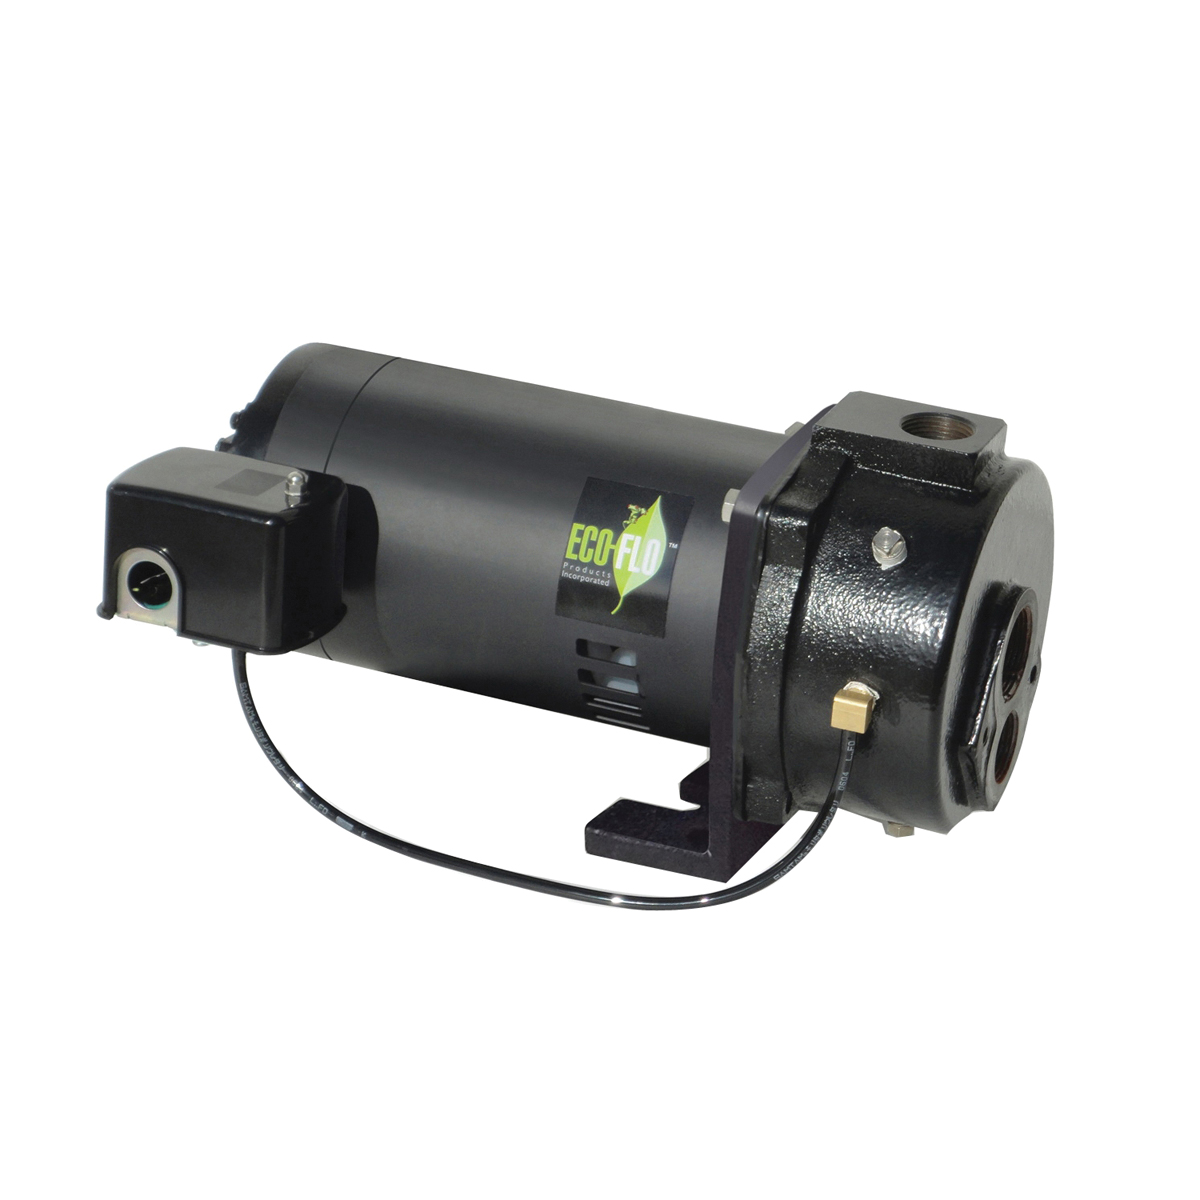 EFCWJ7 Deep Well Jet Pump, 115/230 V, 3/4 hp, 1-1/4 in Suction, 1 in Discharge Connection, 7 gpm, Iron